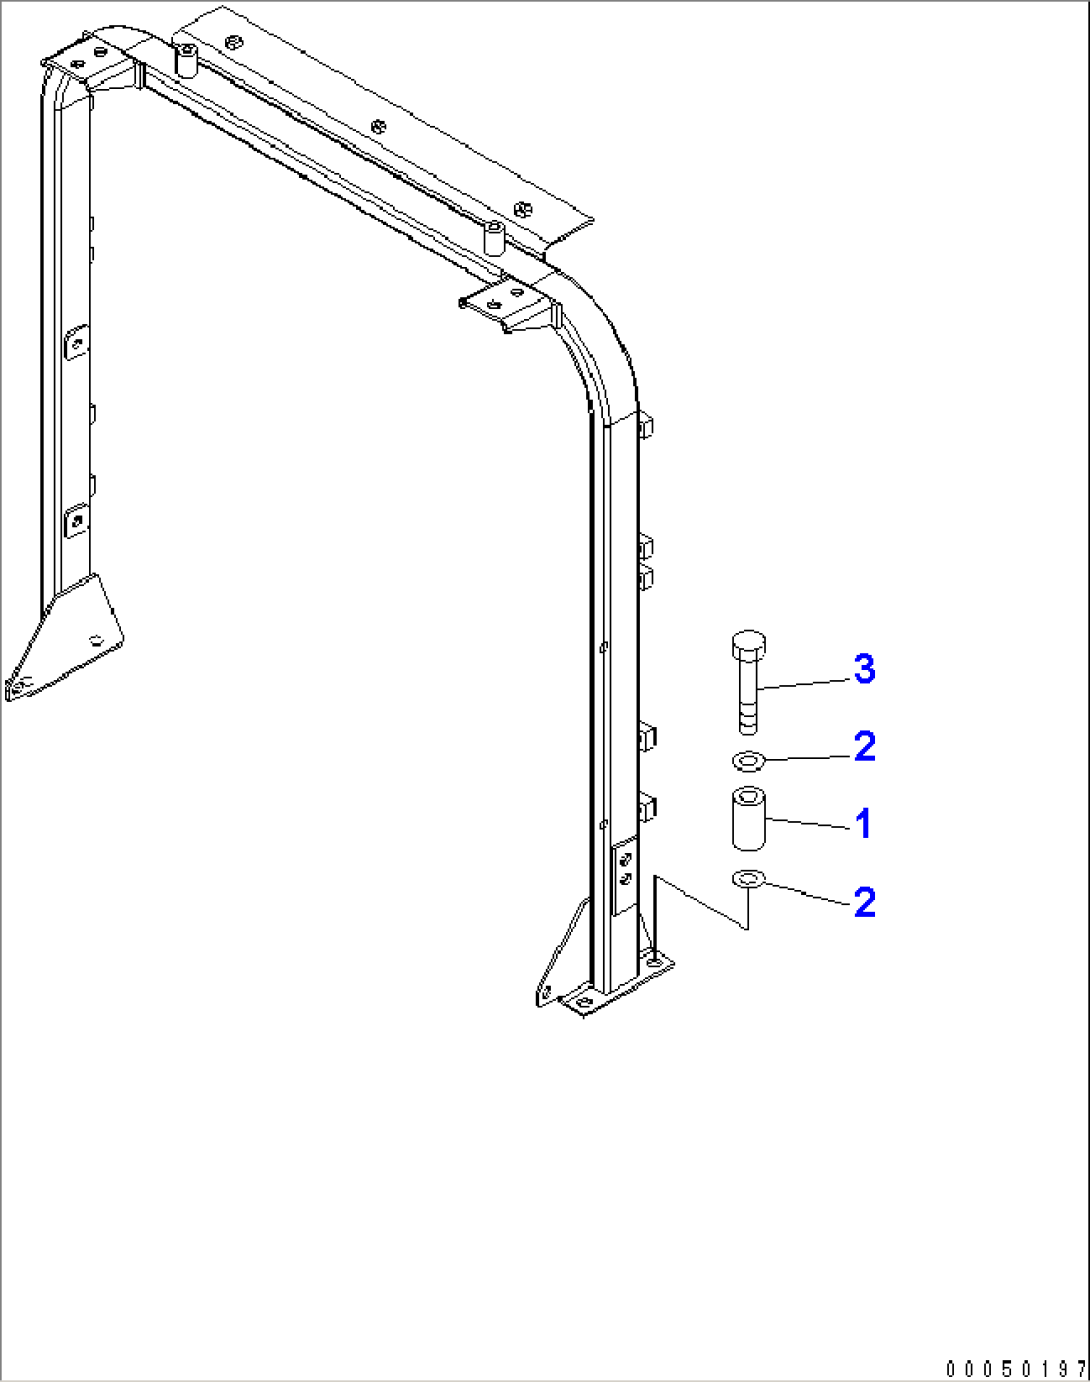 HOOD (FRAME MOUNTING PARTS)